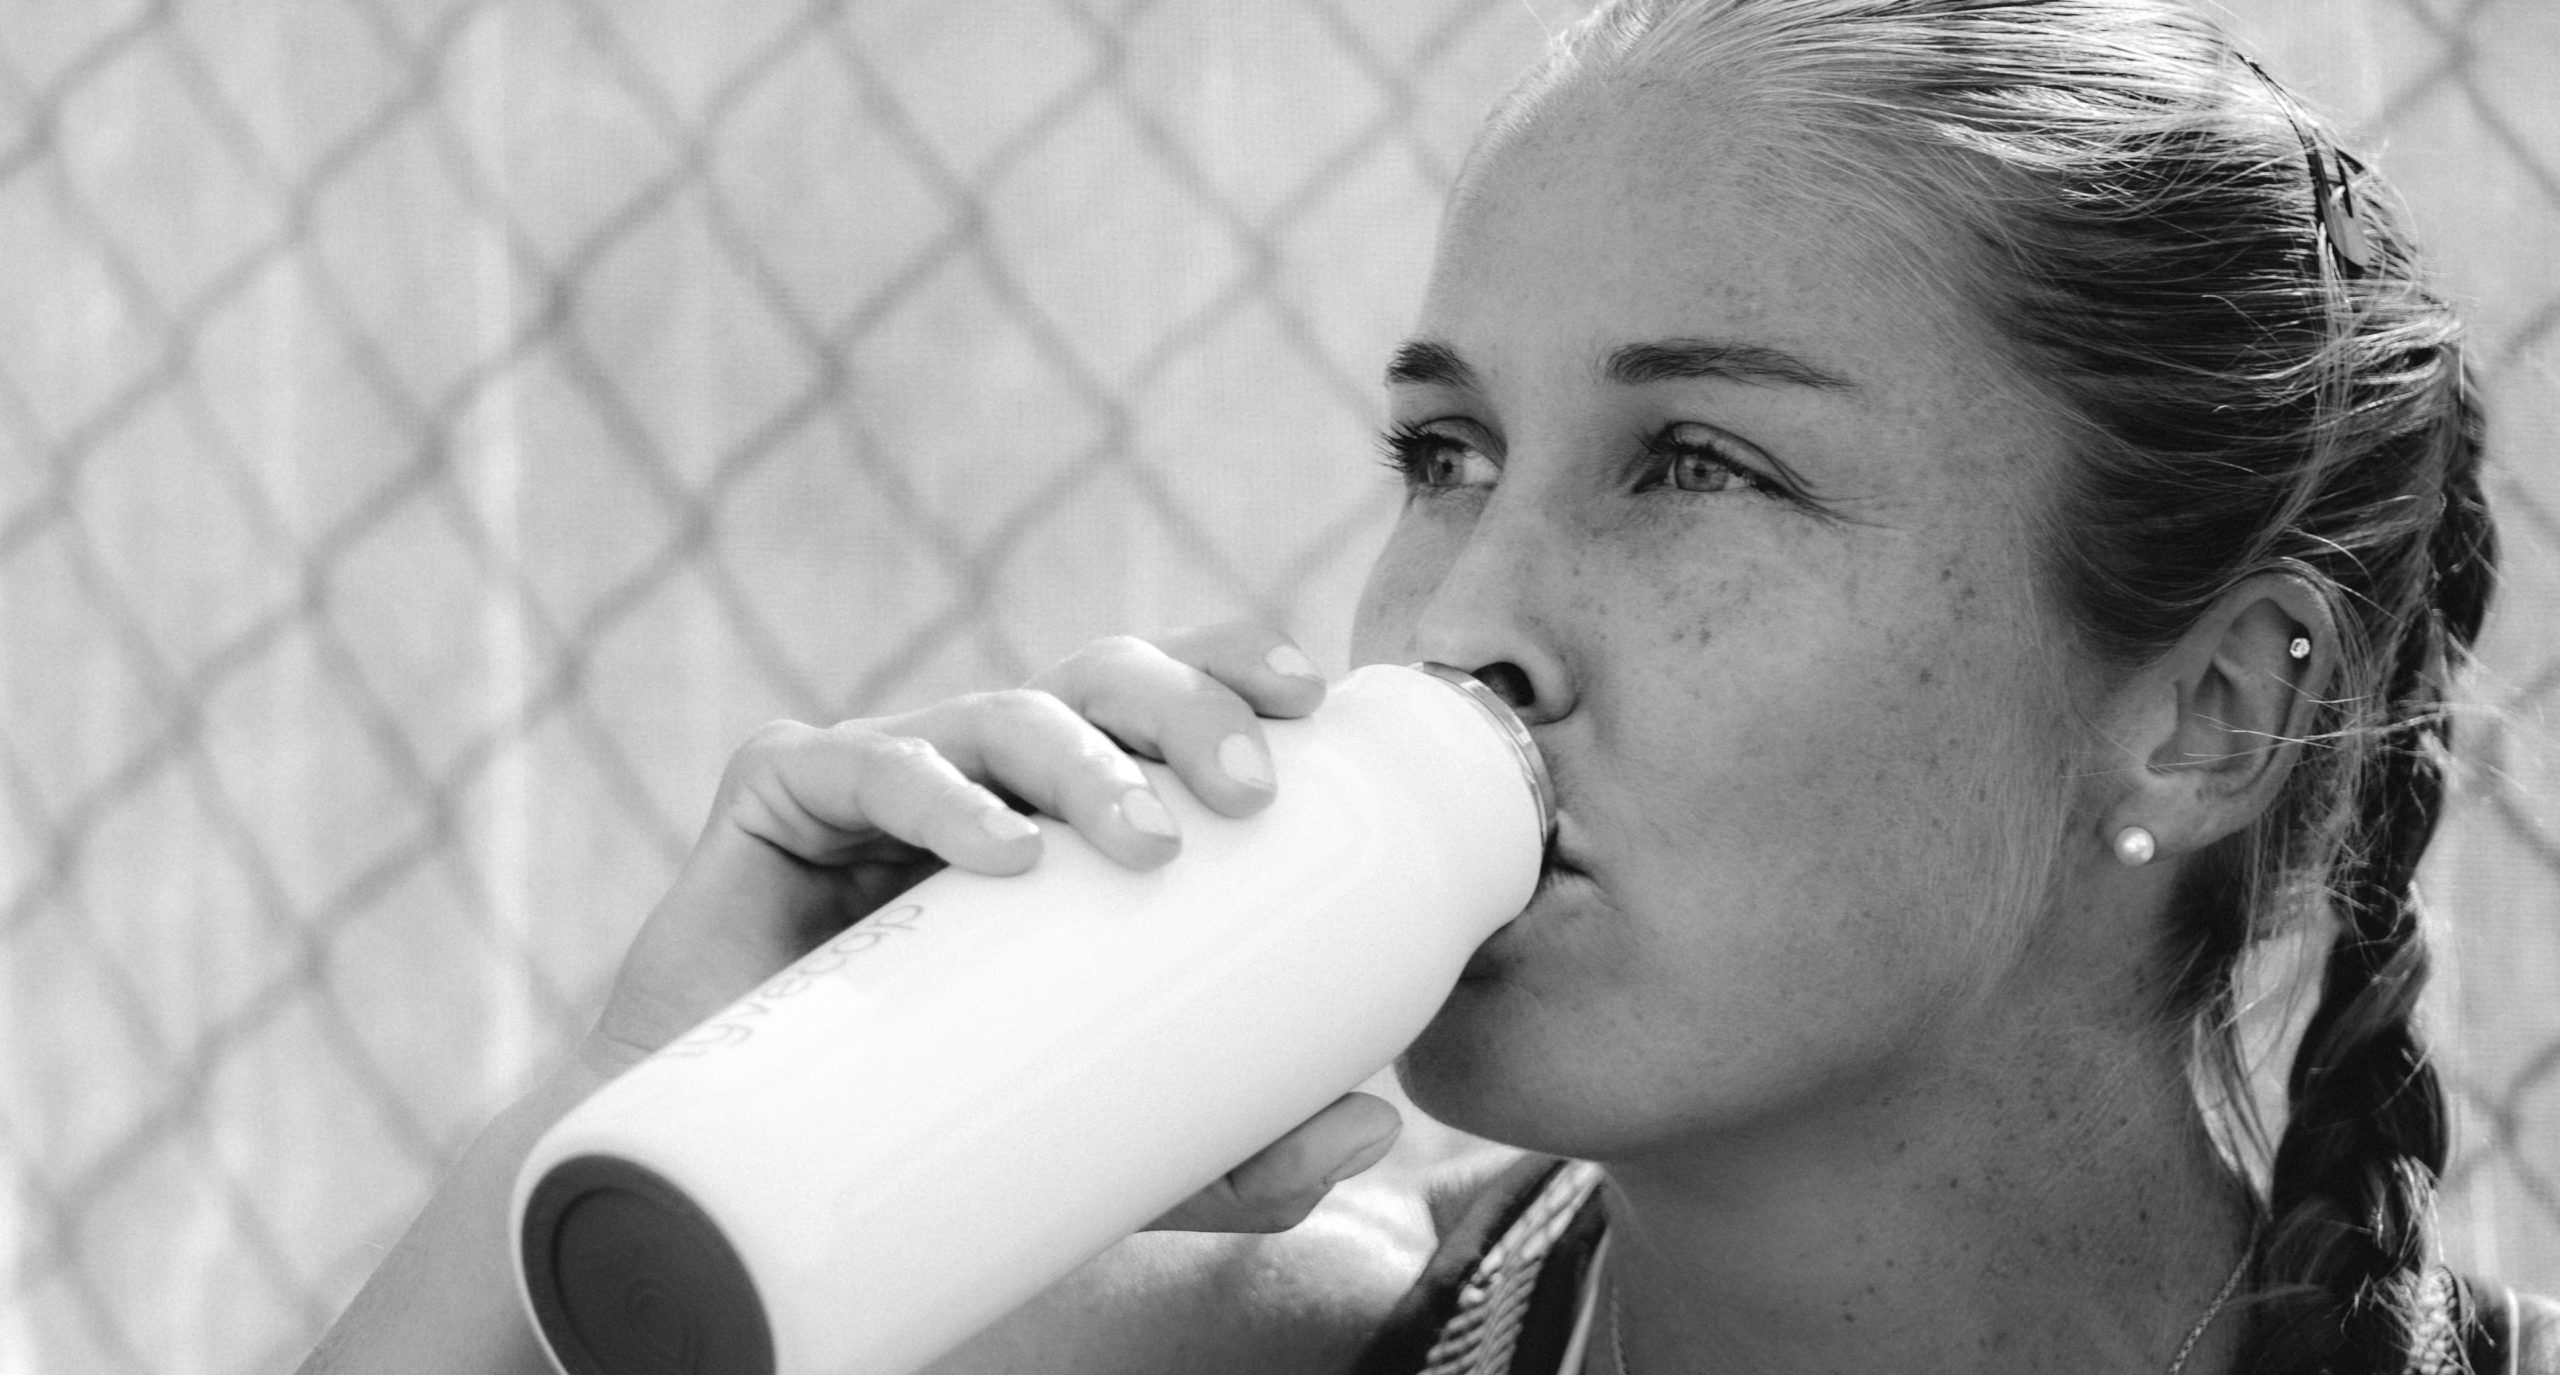 a photo of shelby rogers drinking her Lyvecap probiotics from a white Lyvecap bottle as she focusing on gut health and athletic performance. 